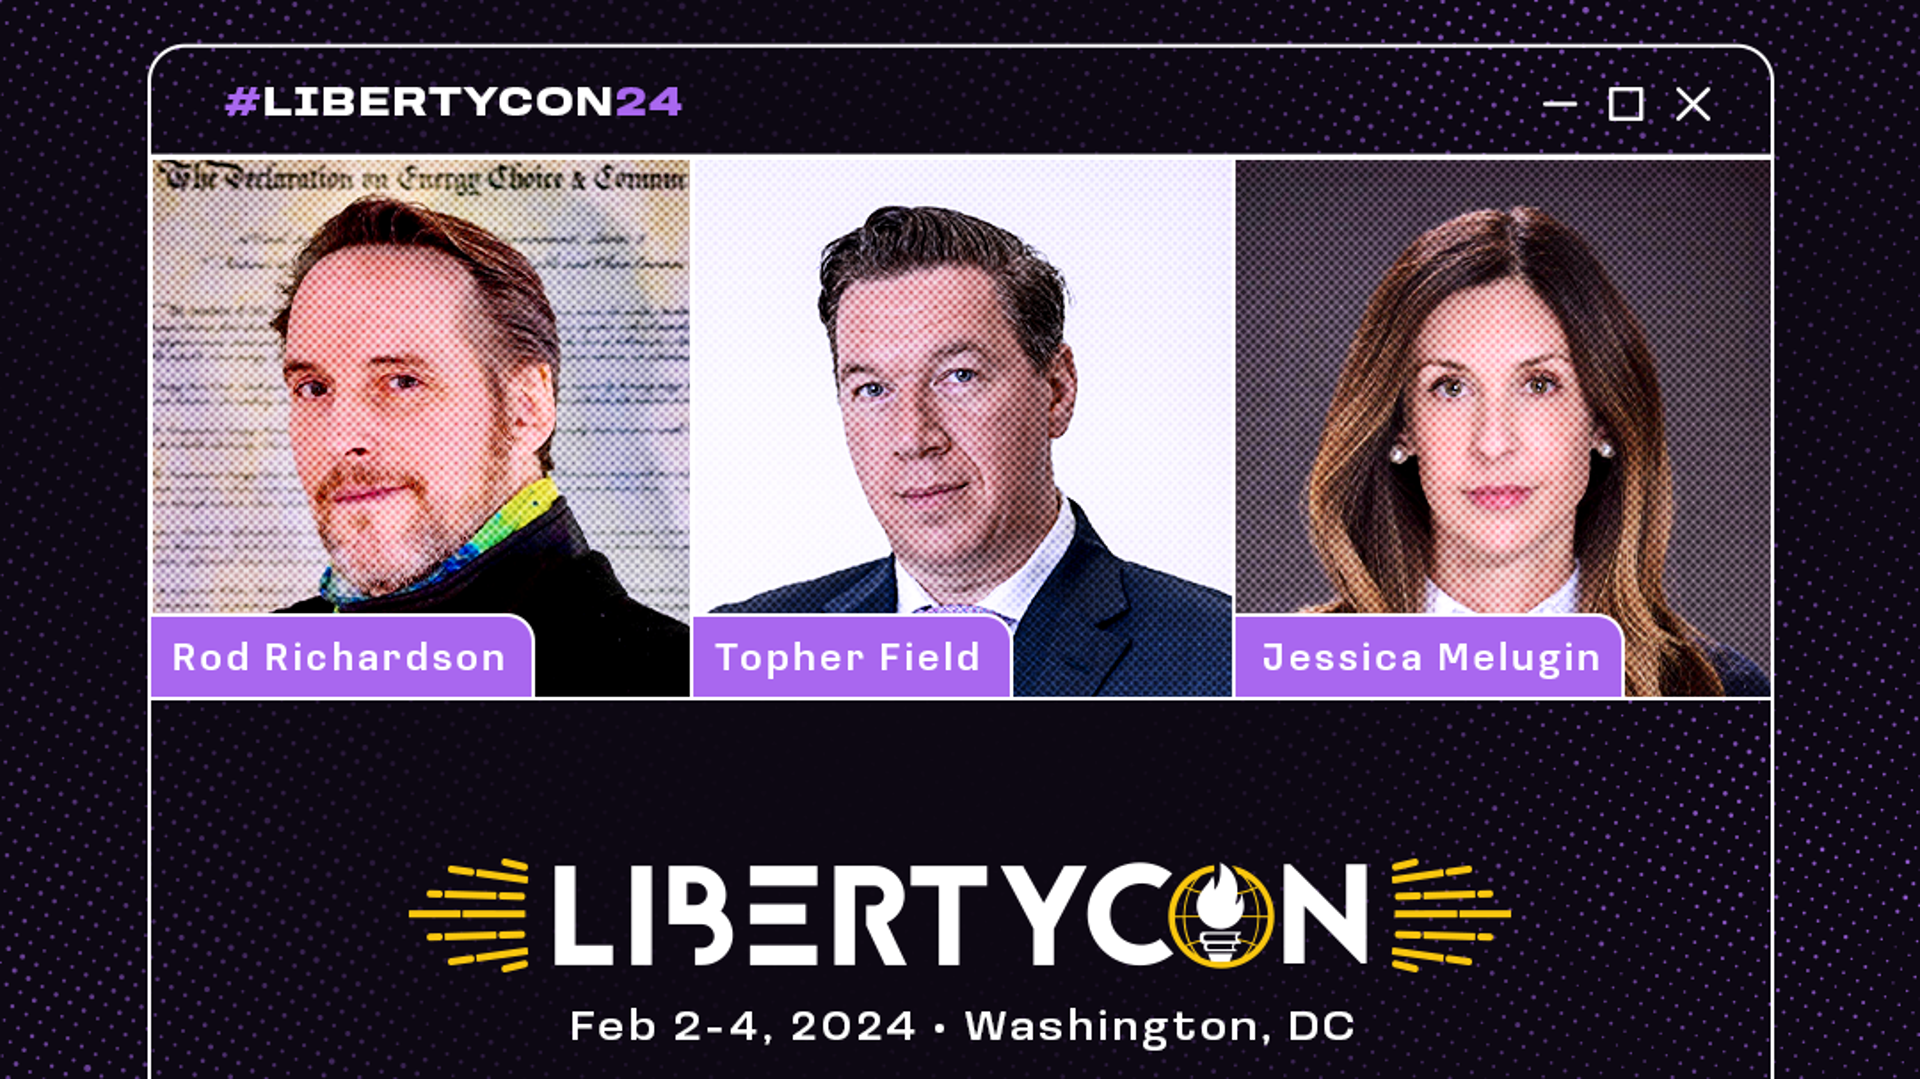 Students For Liberty is announcing three new speakers for LibertyCon International 2024: Rod Richardson, Topher Field, and Jessica Melugin